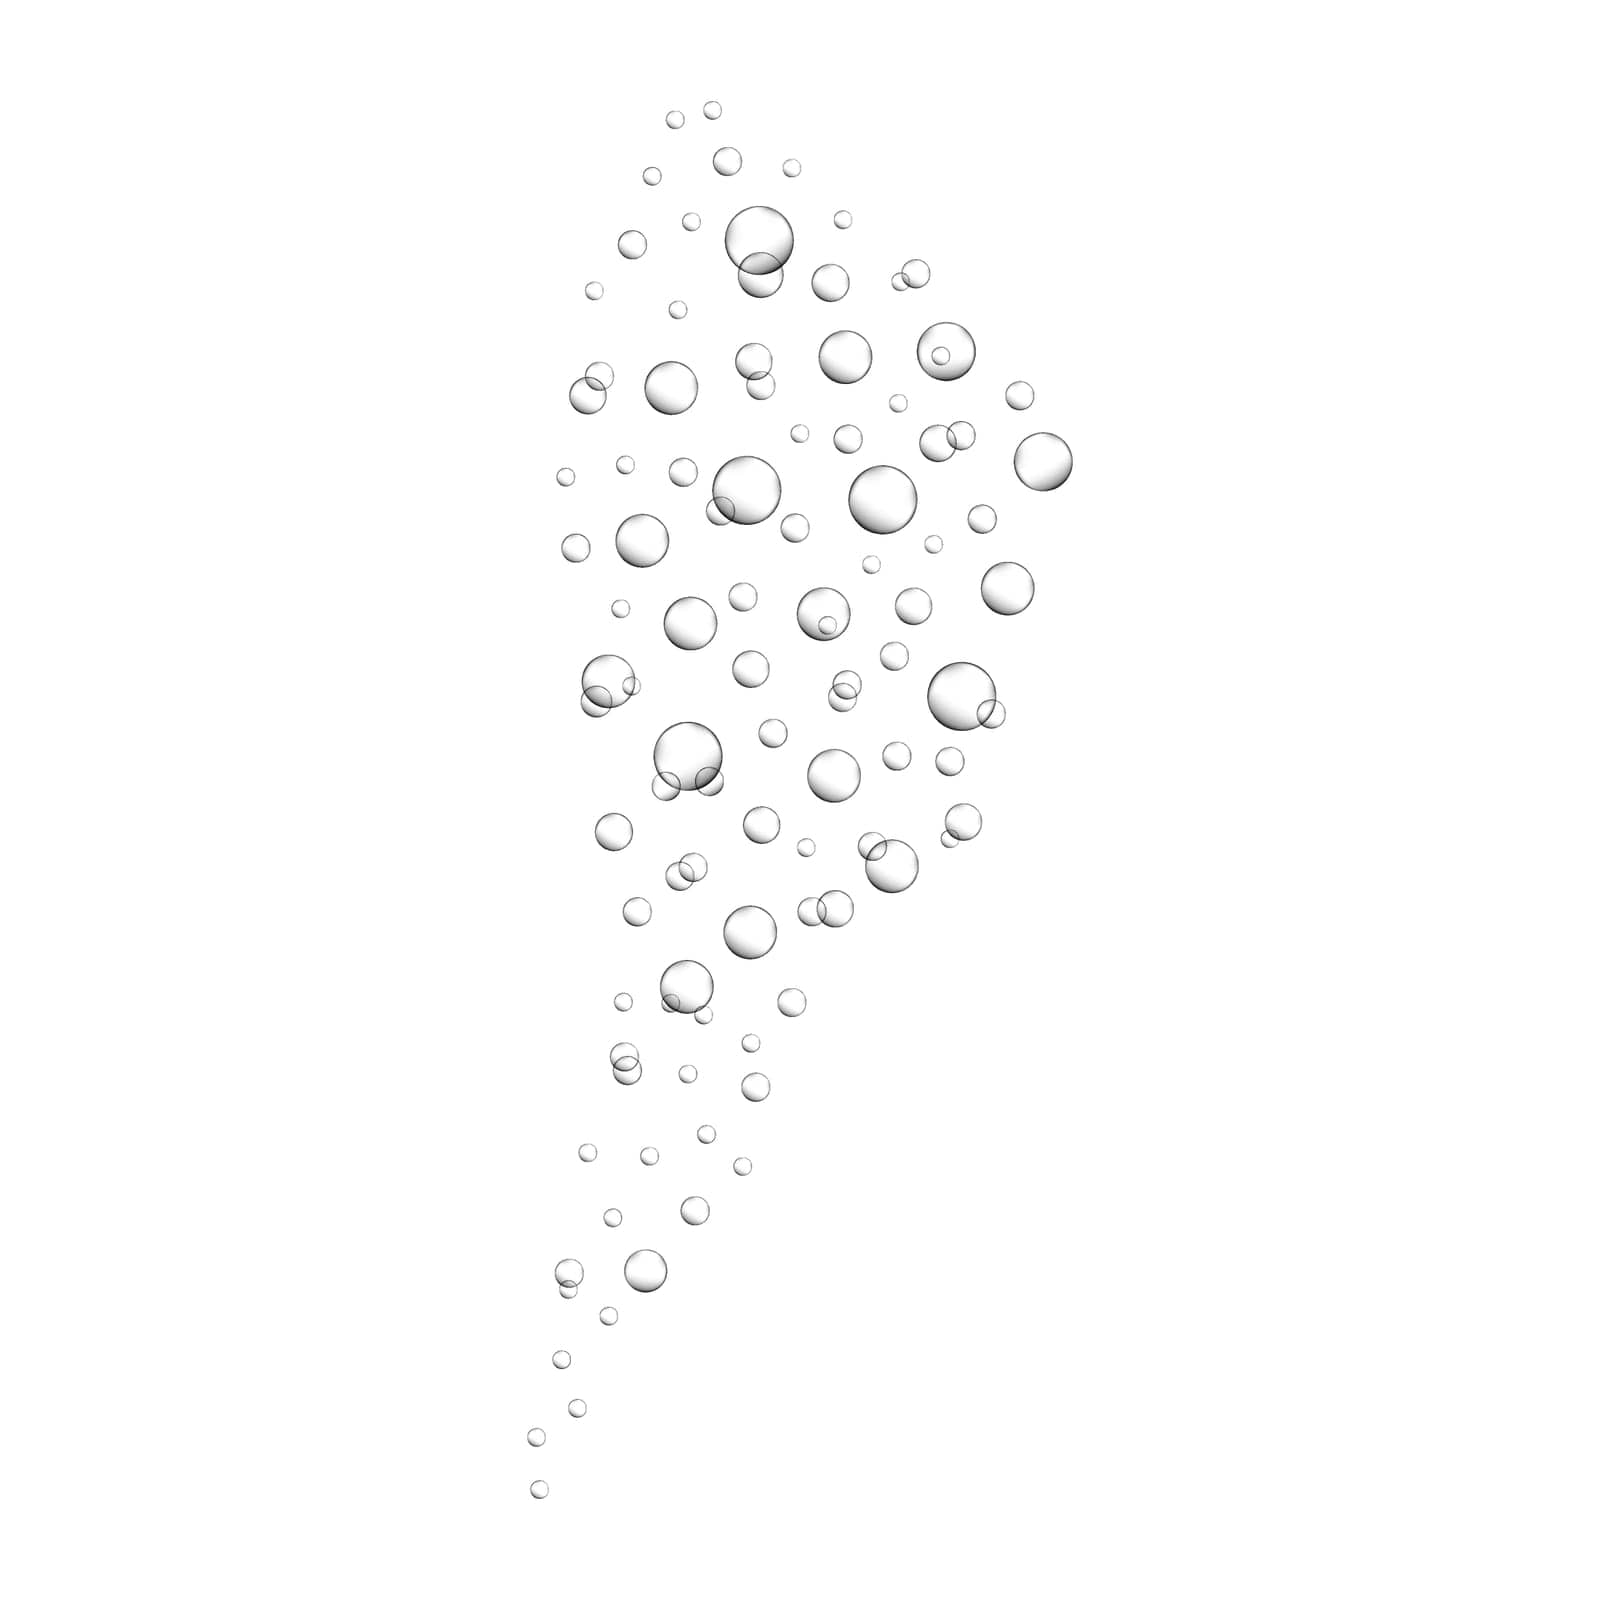 Water air bubbles isolated on white background. Oxygen bubbles in ocean, sea or aquarium. Fizzy drink, soda, lemonade, champagne. Vector realistic illustration by Ablohina